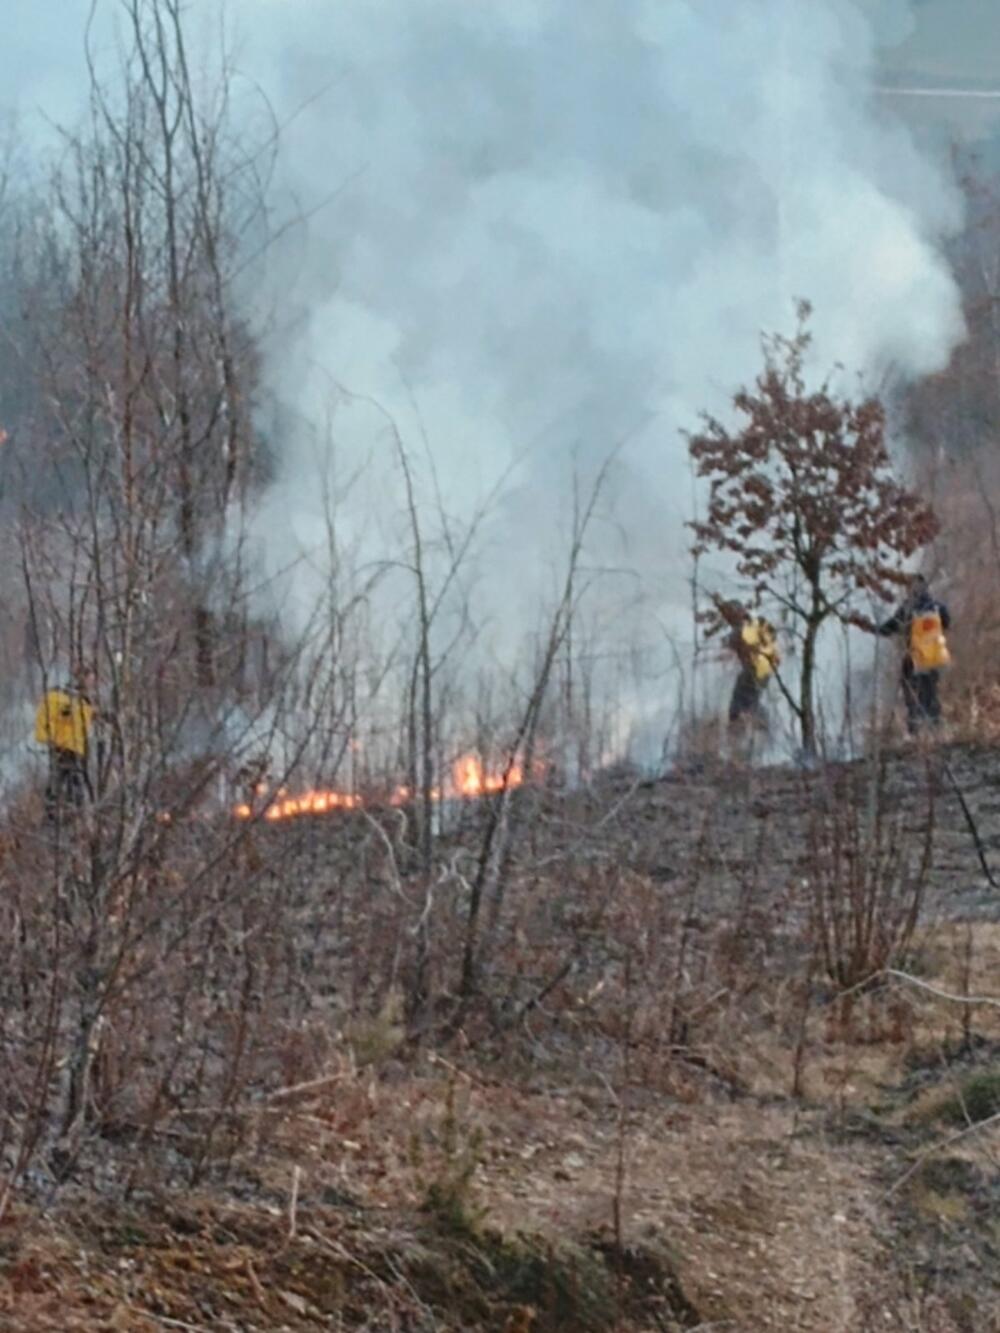 Members of the Protection and Rescue Service also intervened in extinguishing the forest fire in Grančarevo and Selima yesterday